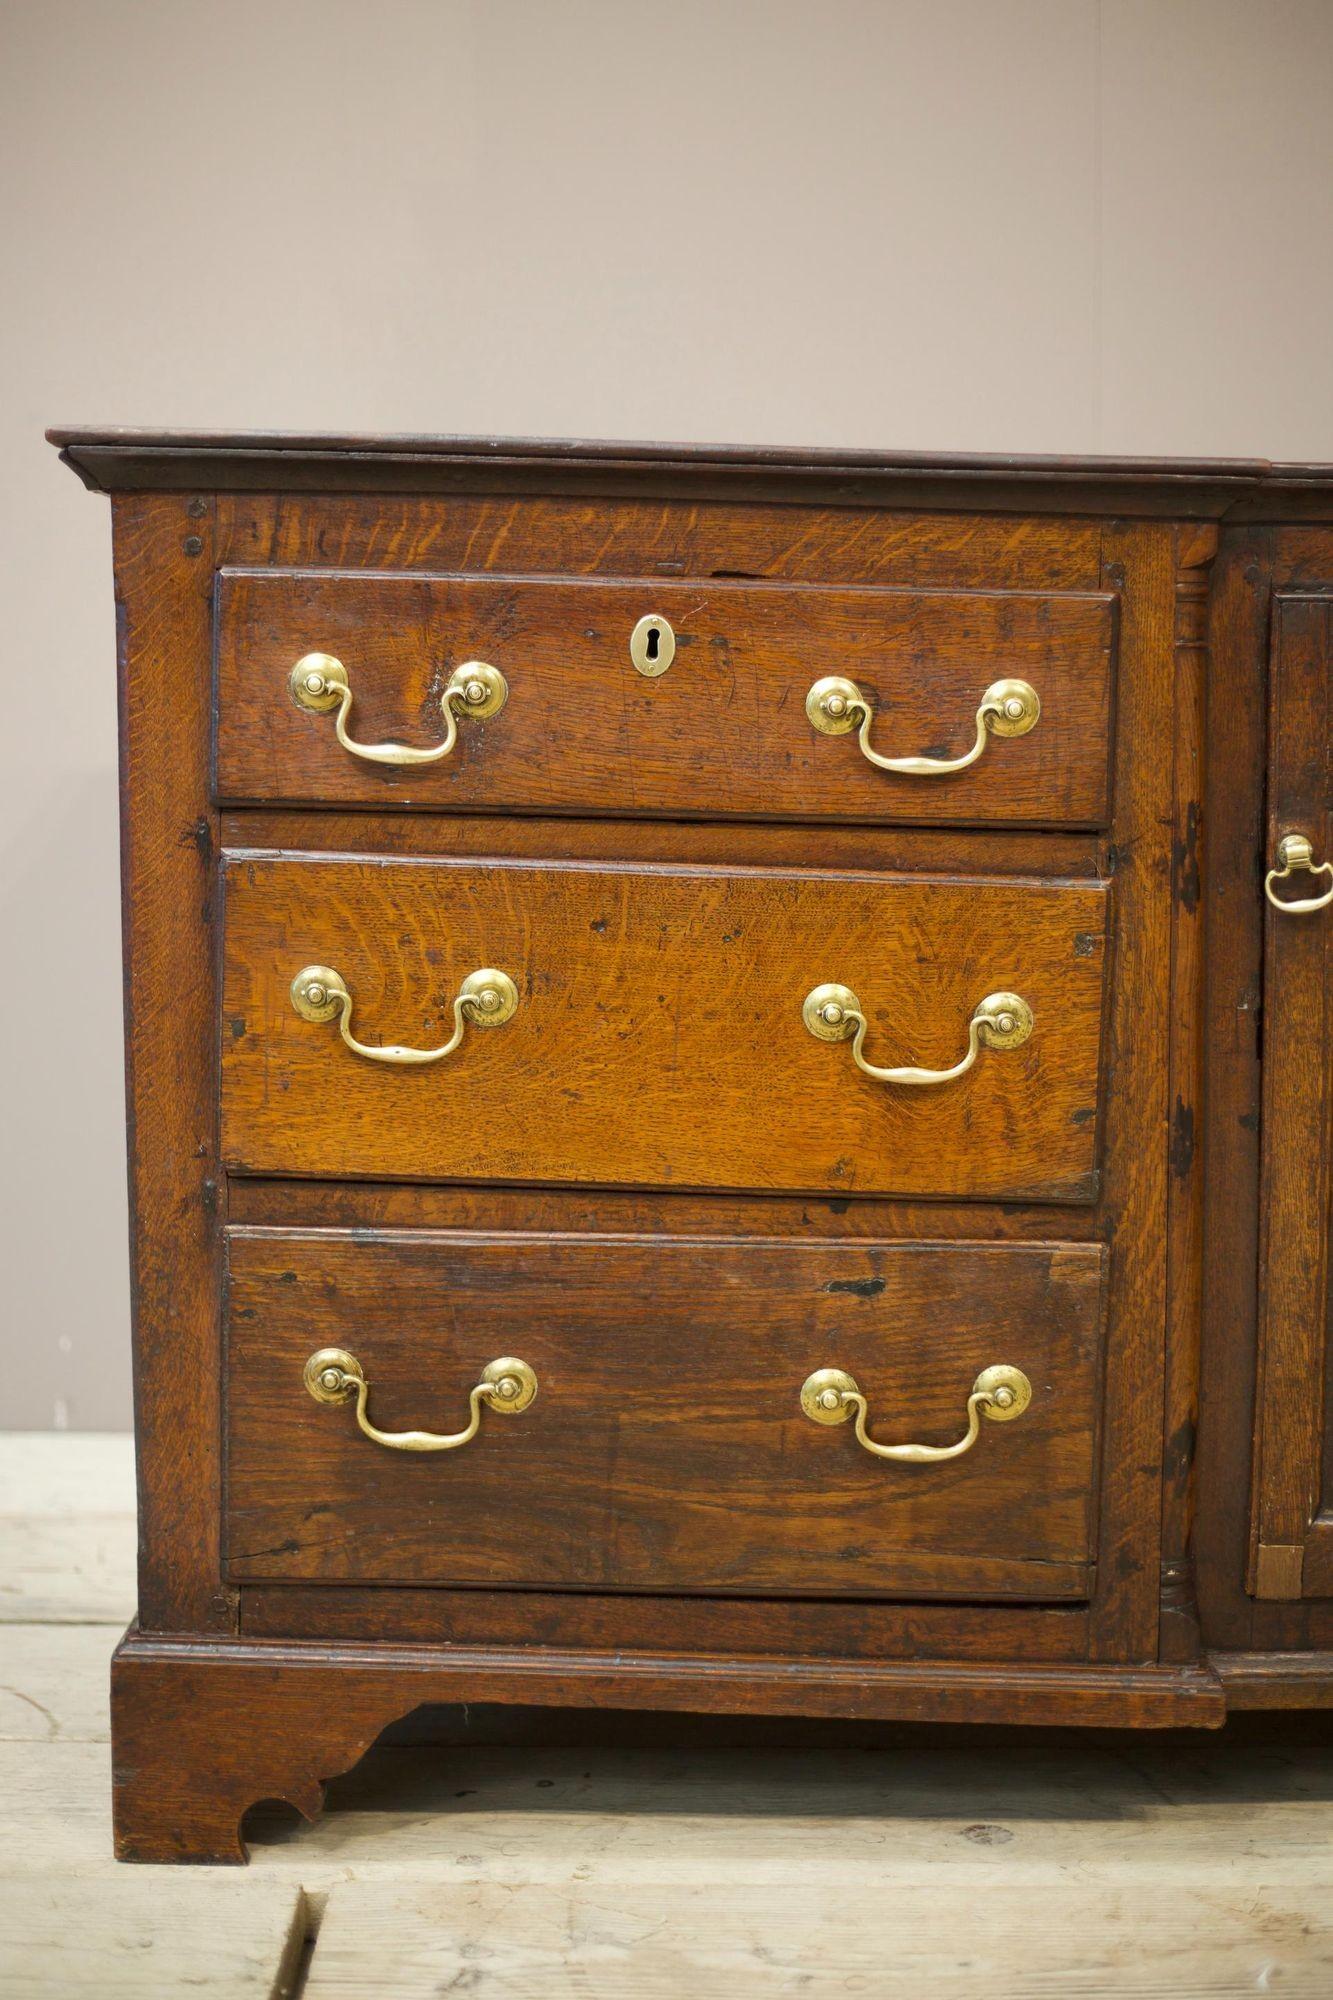 This is a very nice genuine 18th century dresser base. Made from solid oak and full of character. The overall condition is very good with patina consistent with age and use. The drawers all open smoothly and shut flush. Some of the drawers have had